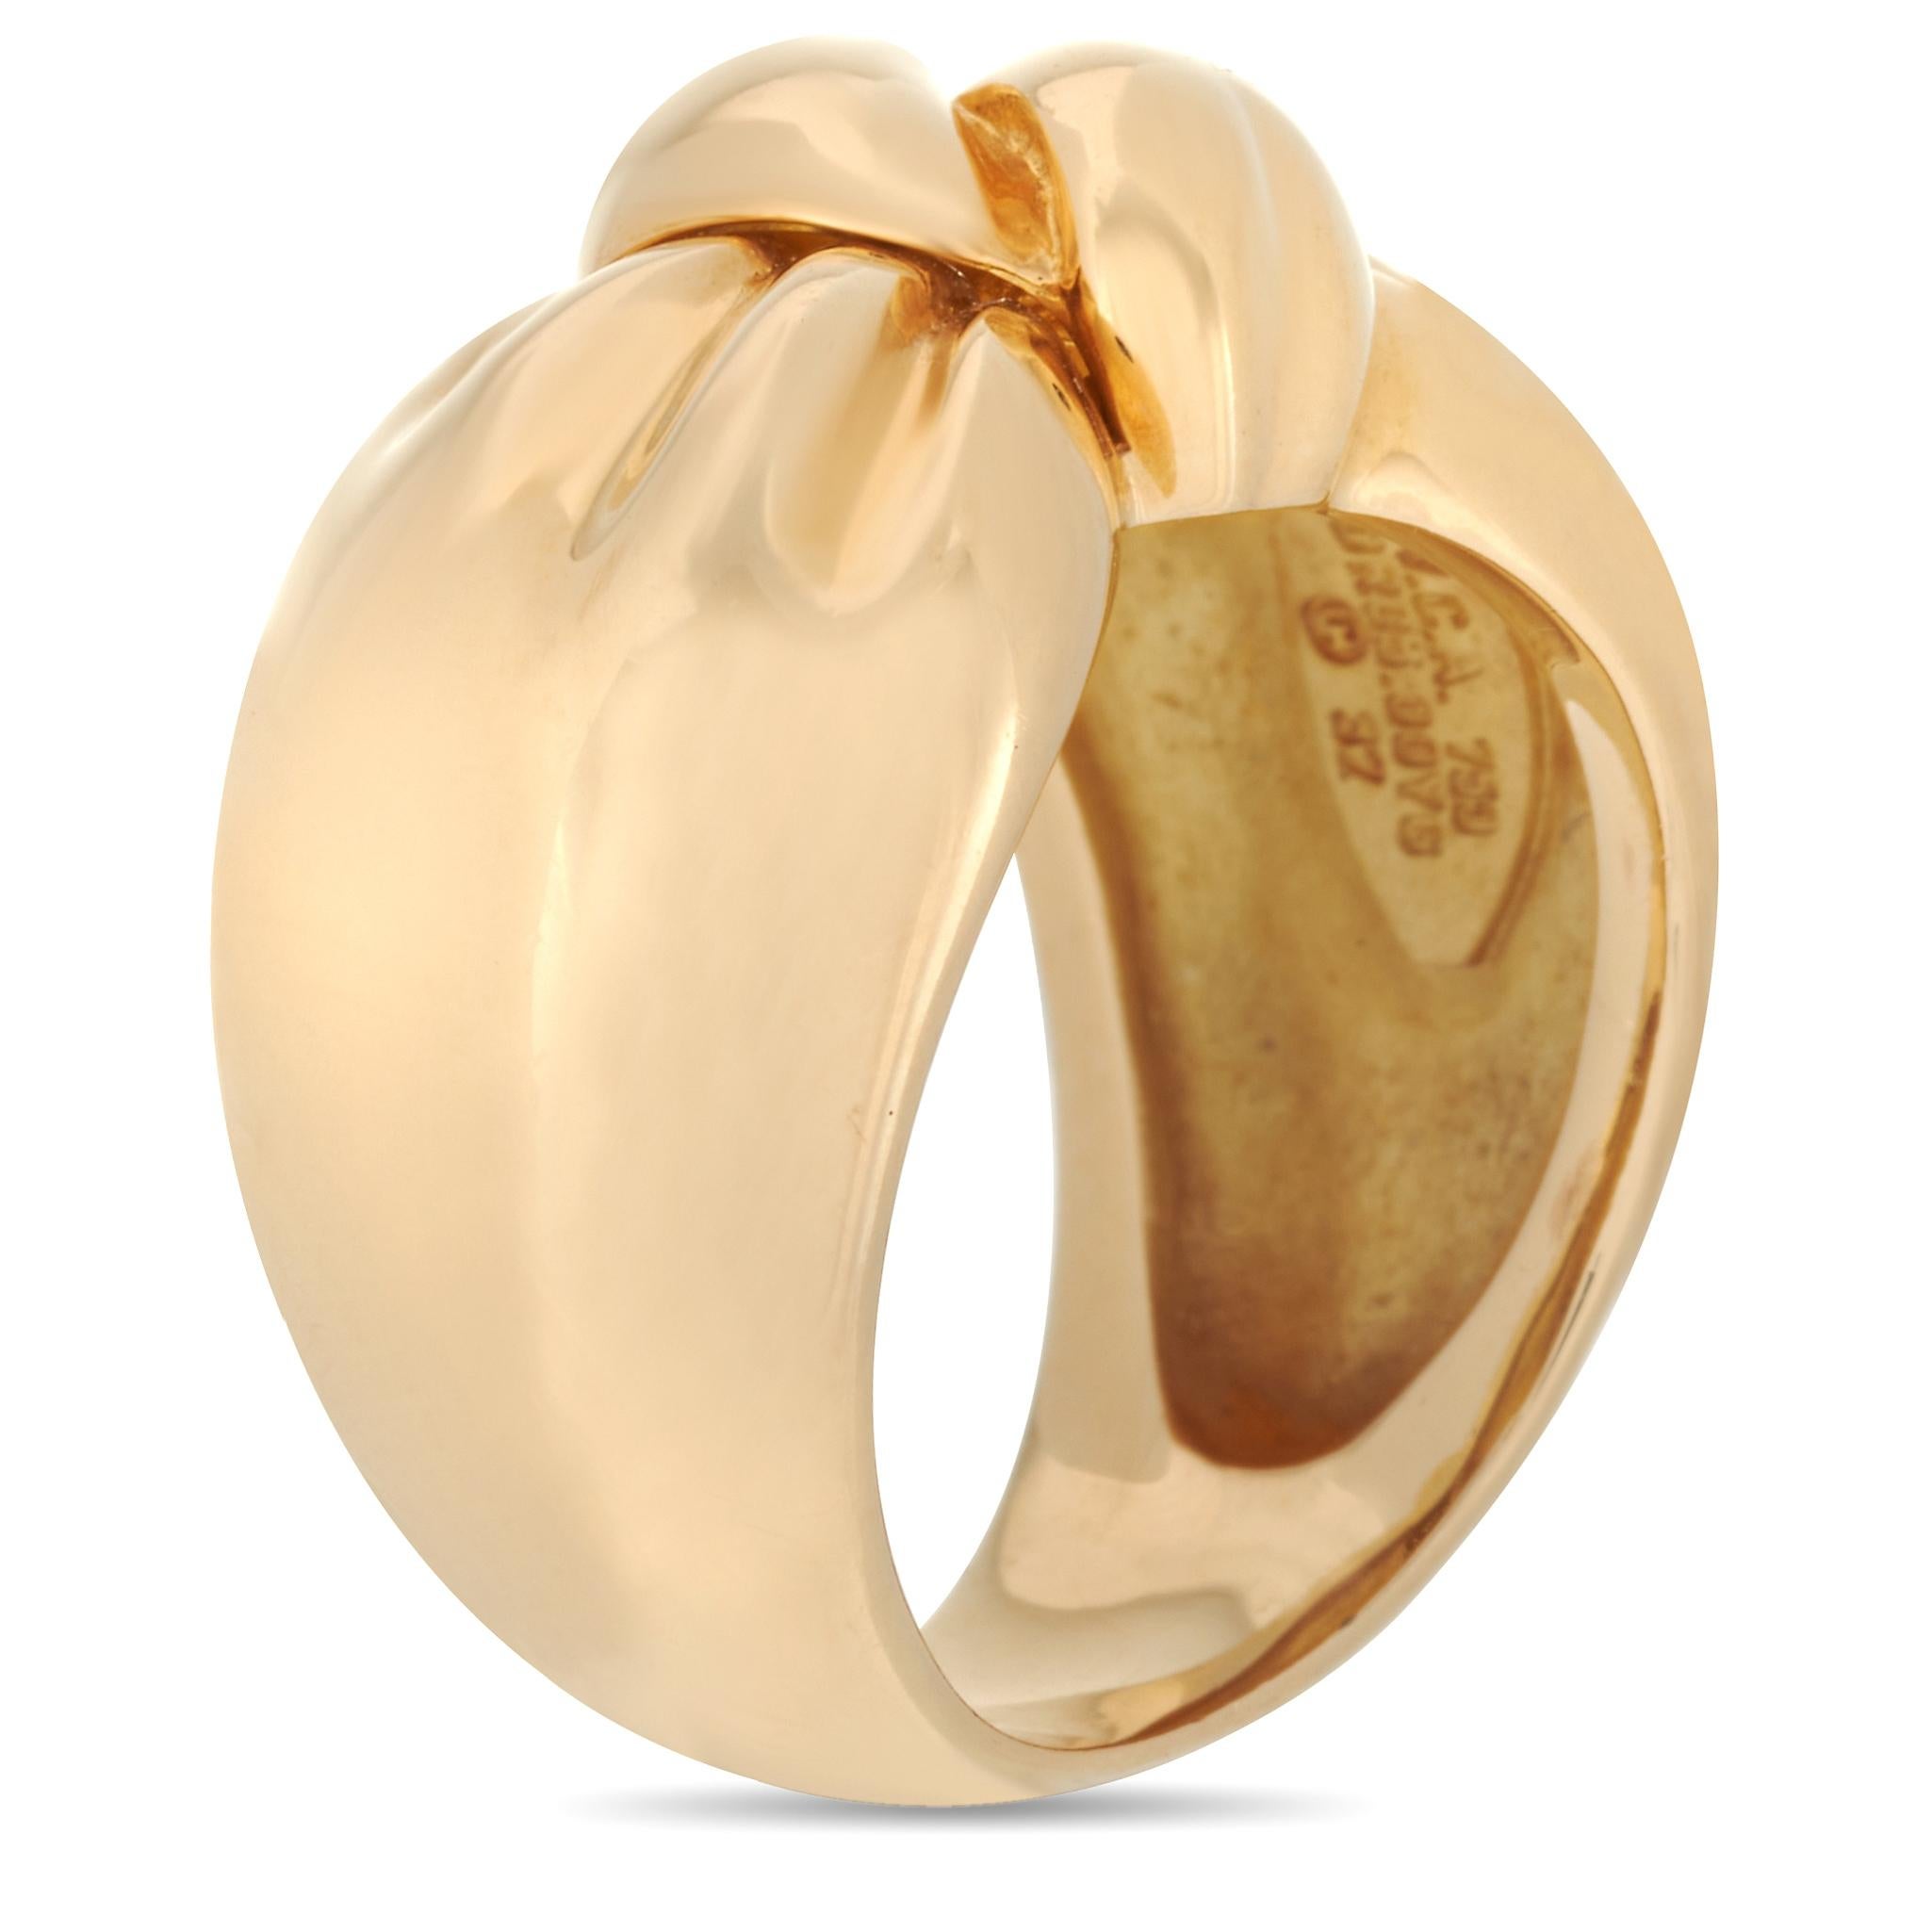 This Van Cleef & Arpels turban ring is crafted from 18K yellow gold and weighs 13.2 grams. It boasts band thickness of 8 mm and top height of 6 mm, while top dimensions measure 10 by 20 mm.
 
 The ring is offered in estate condition and includes the